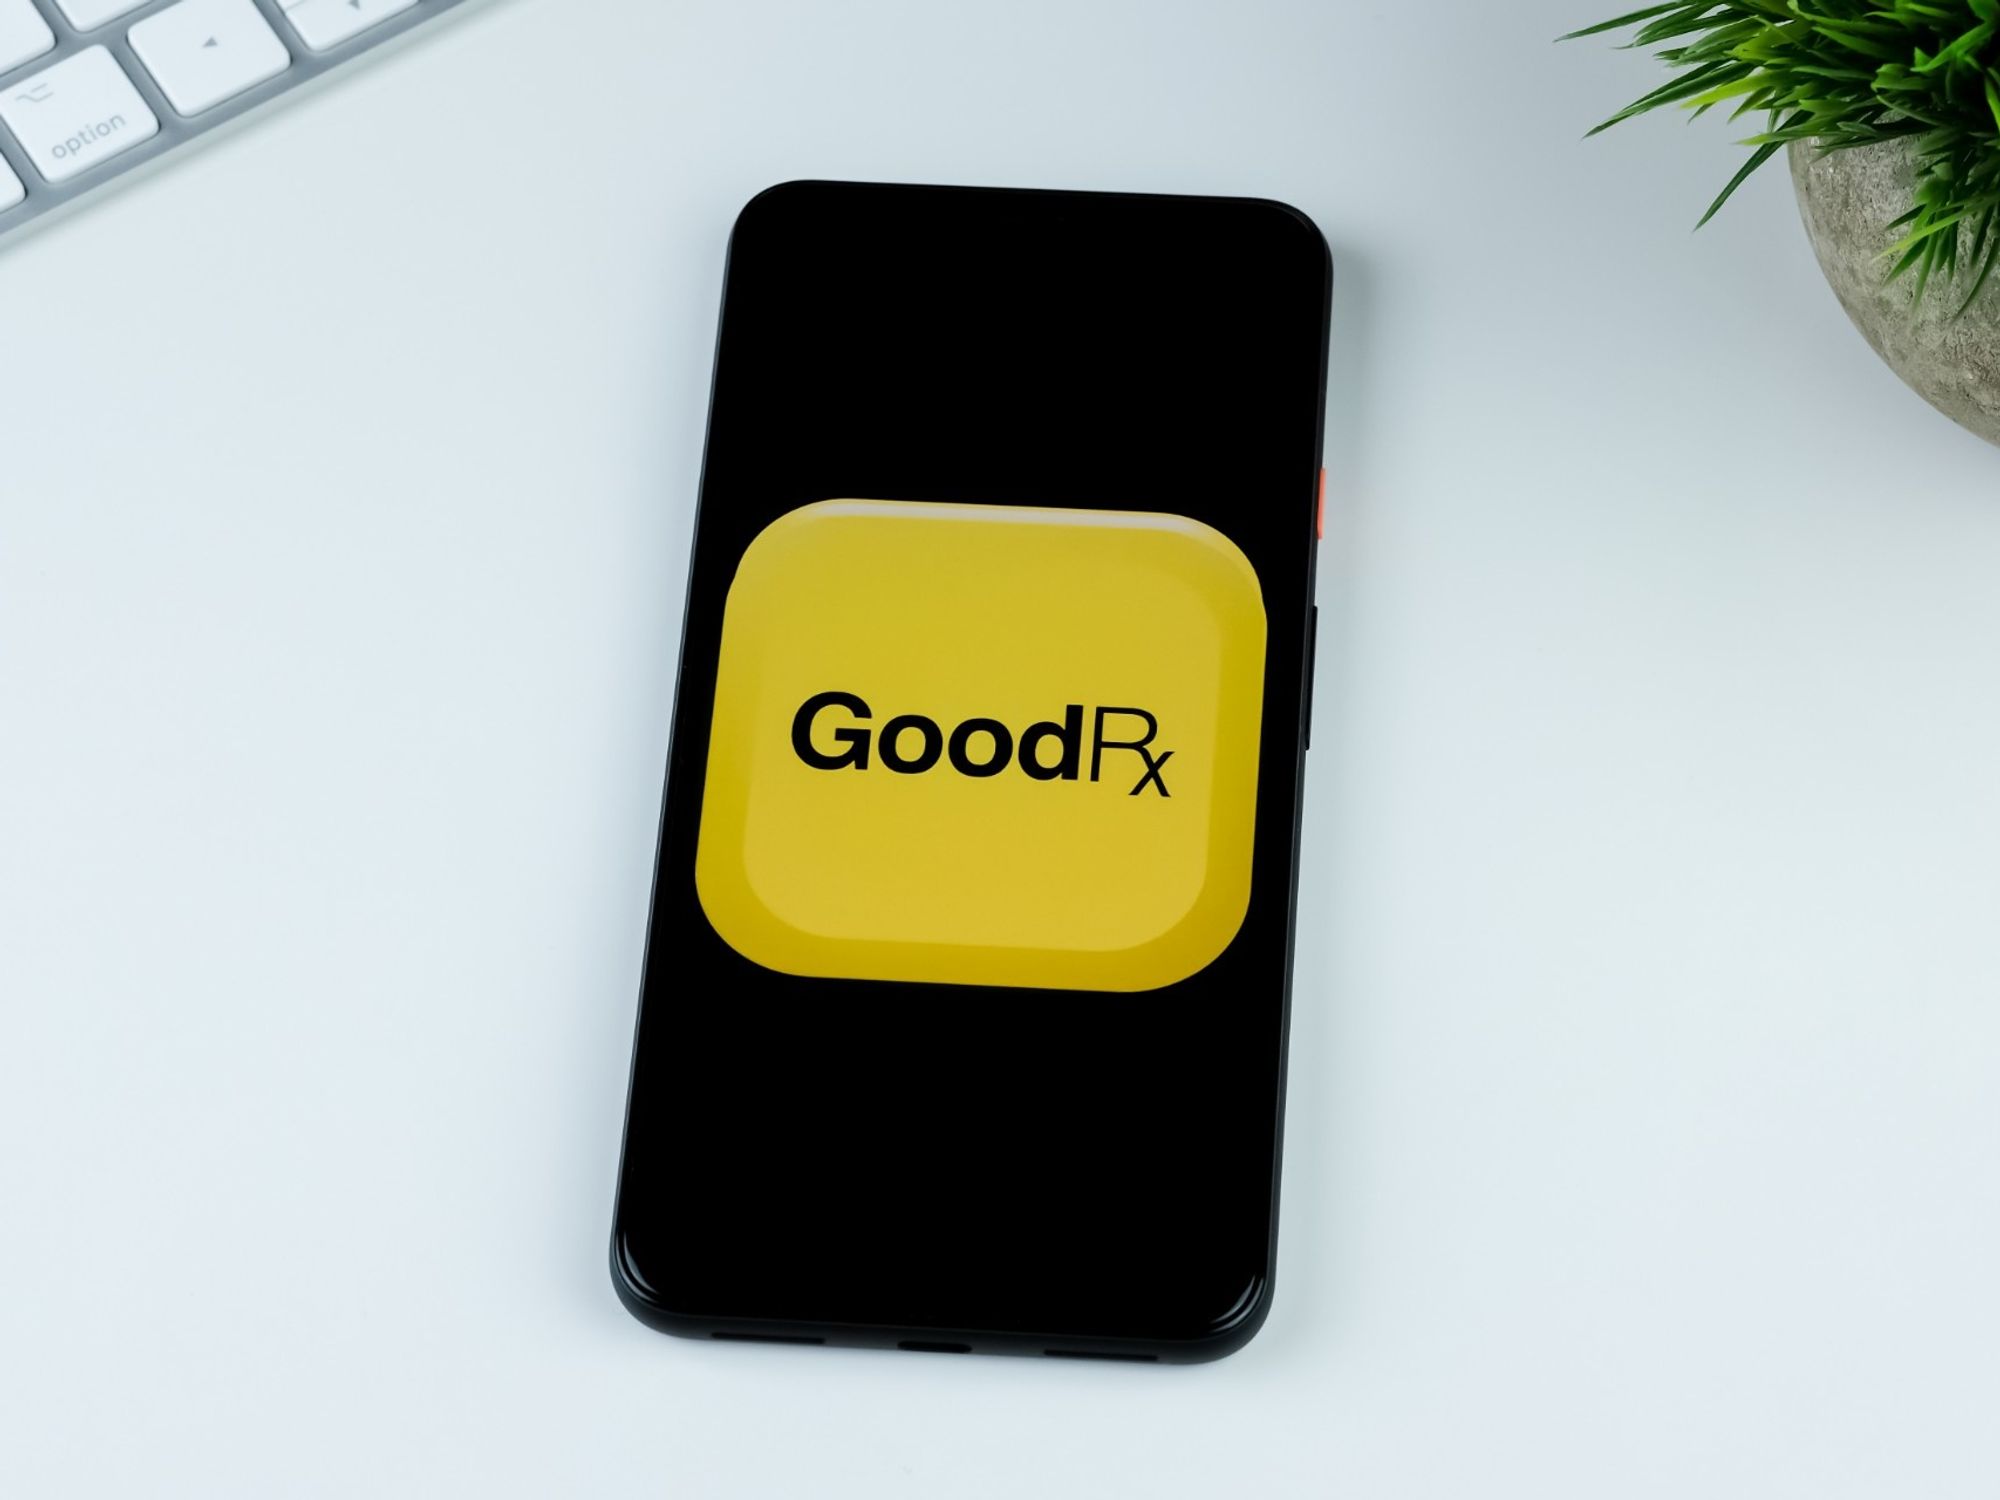 GoodRx Shares Tumble but CEO Says he Never Looks at Stock Price: ‘If I Did, I Would Jump out this Window’